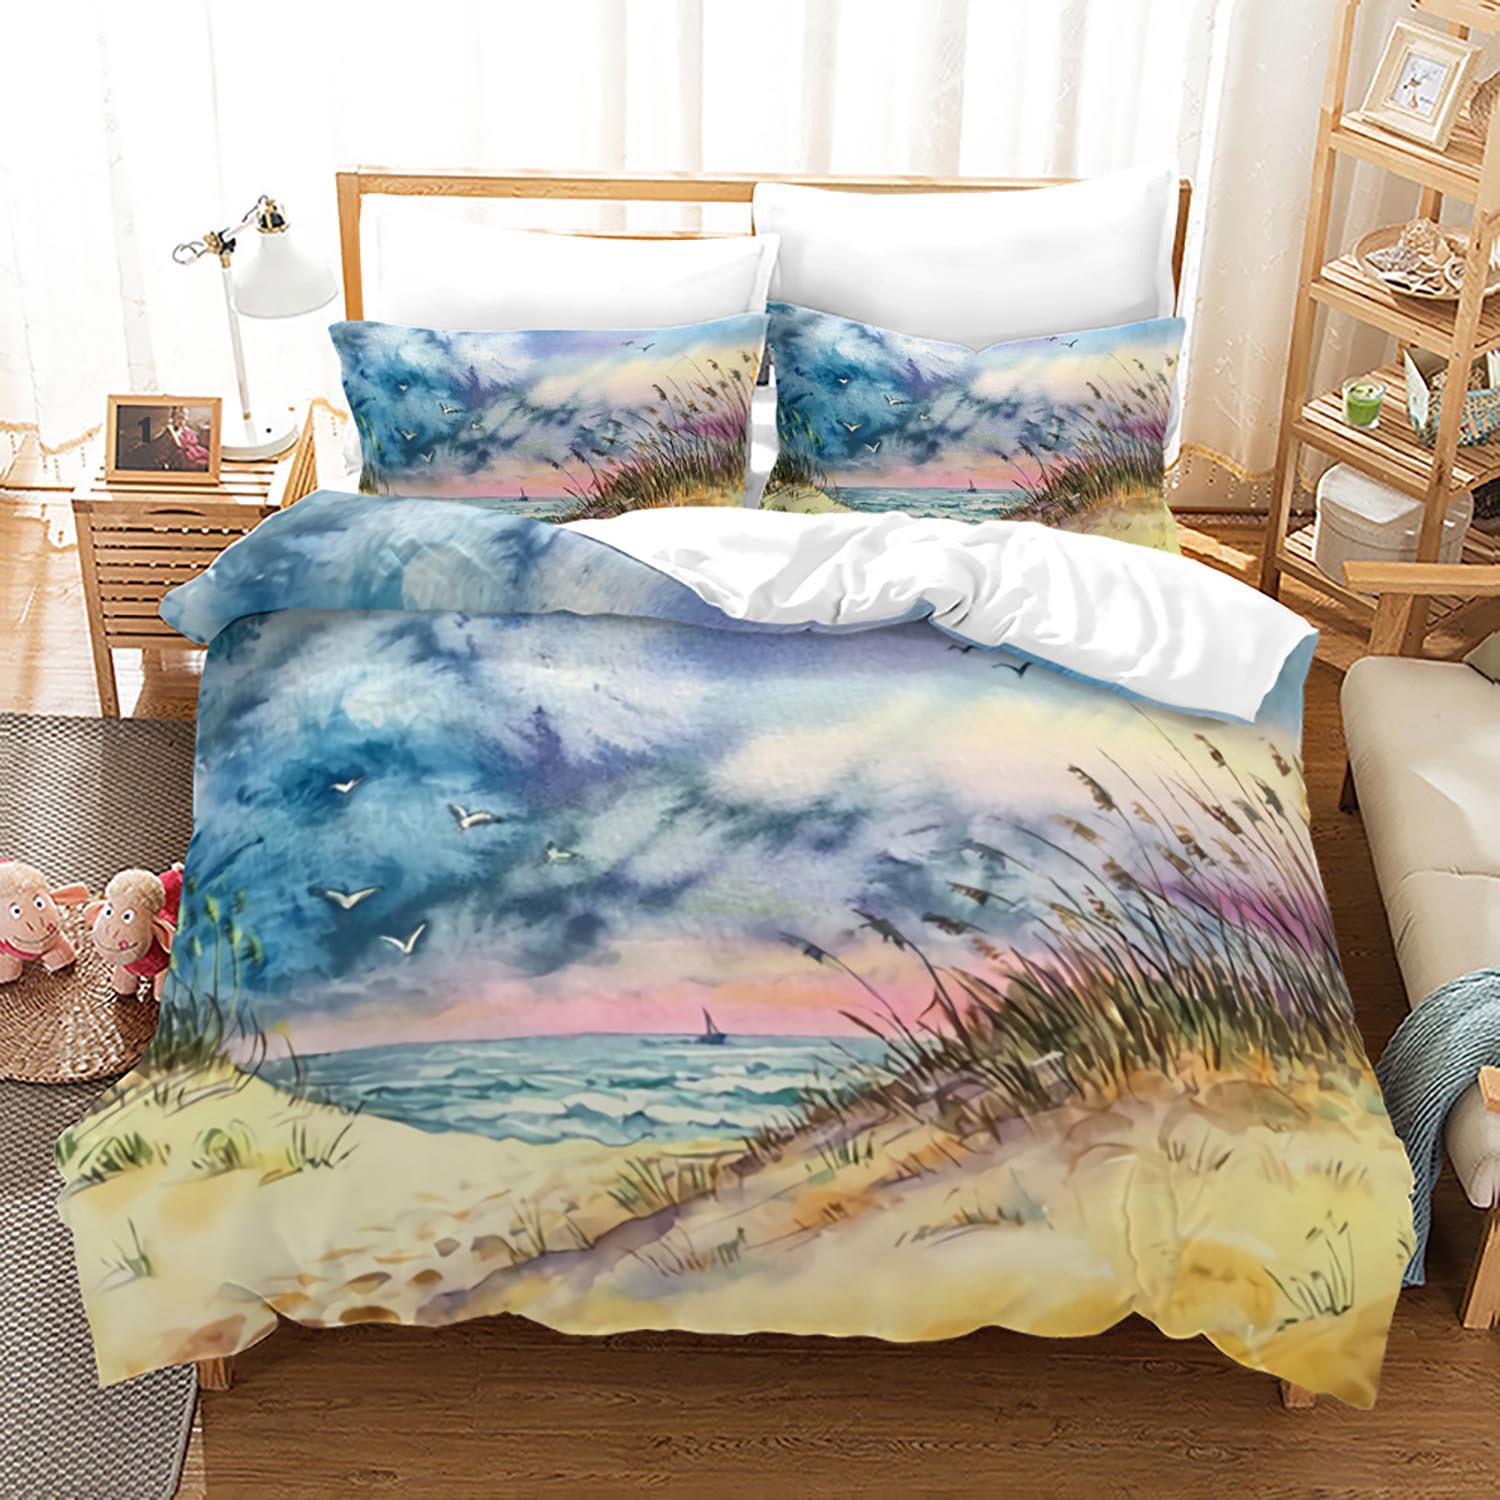 Ocean Bedding Set King Colorful Beach Landscape Duvet Cover In Oil Painting Style Famous Hawaii Coastal Polyester Quilt Cover